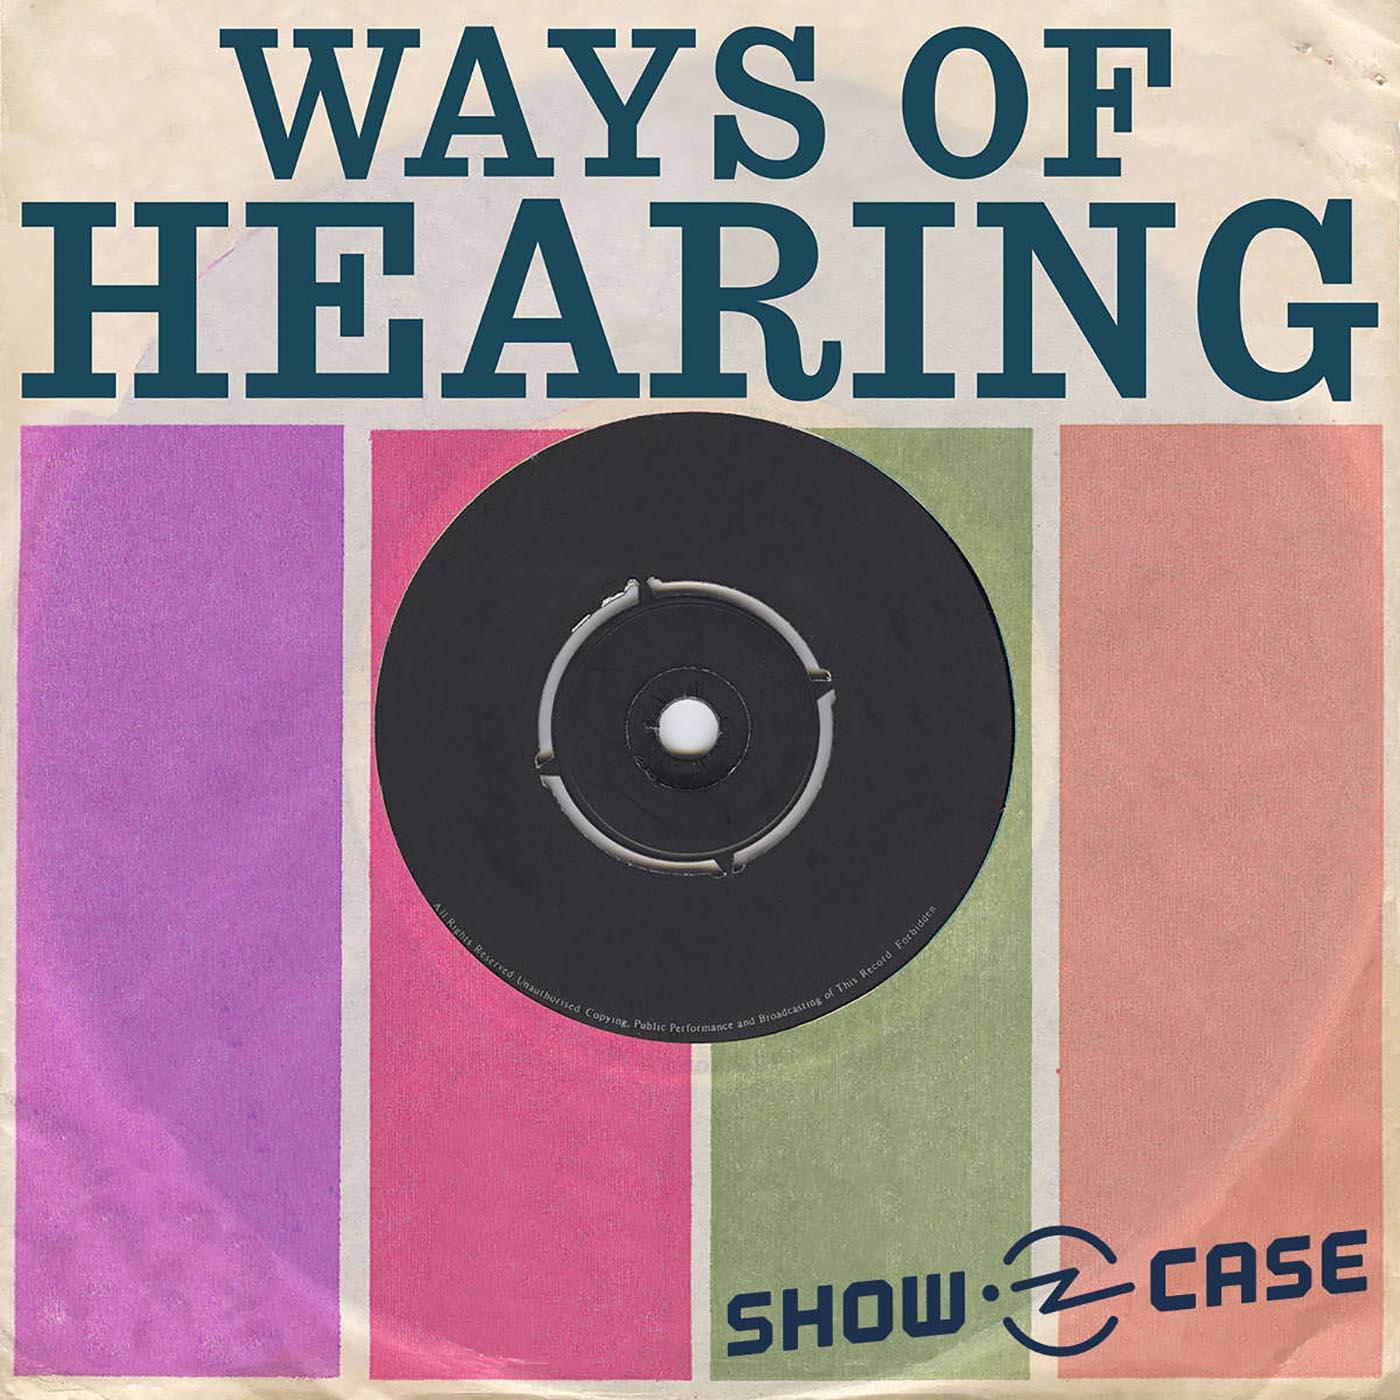 Thumbnail for "Ways of Hearing #5 – POWER".